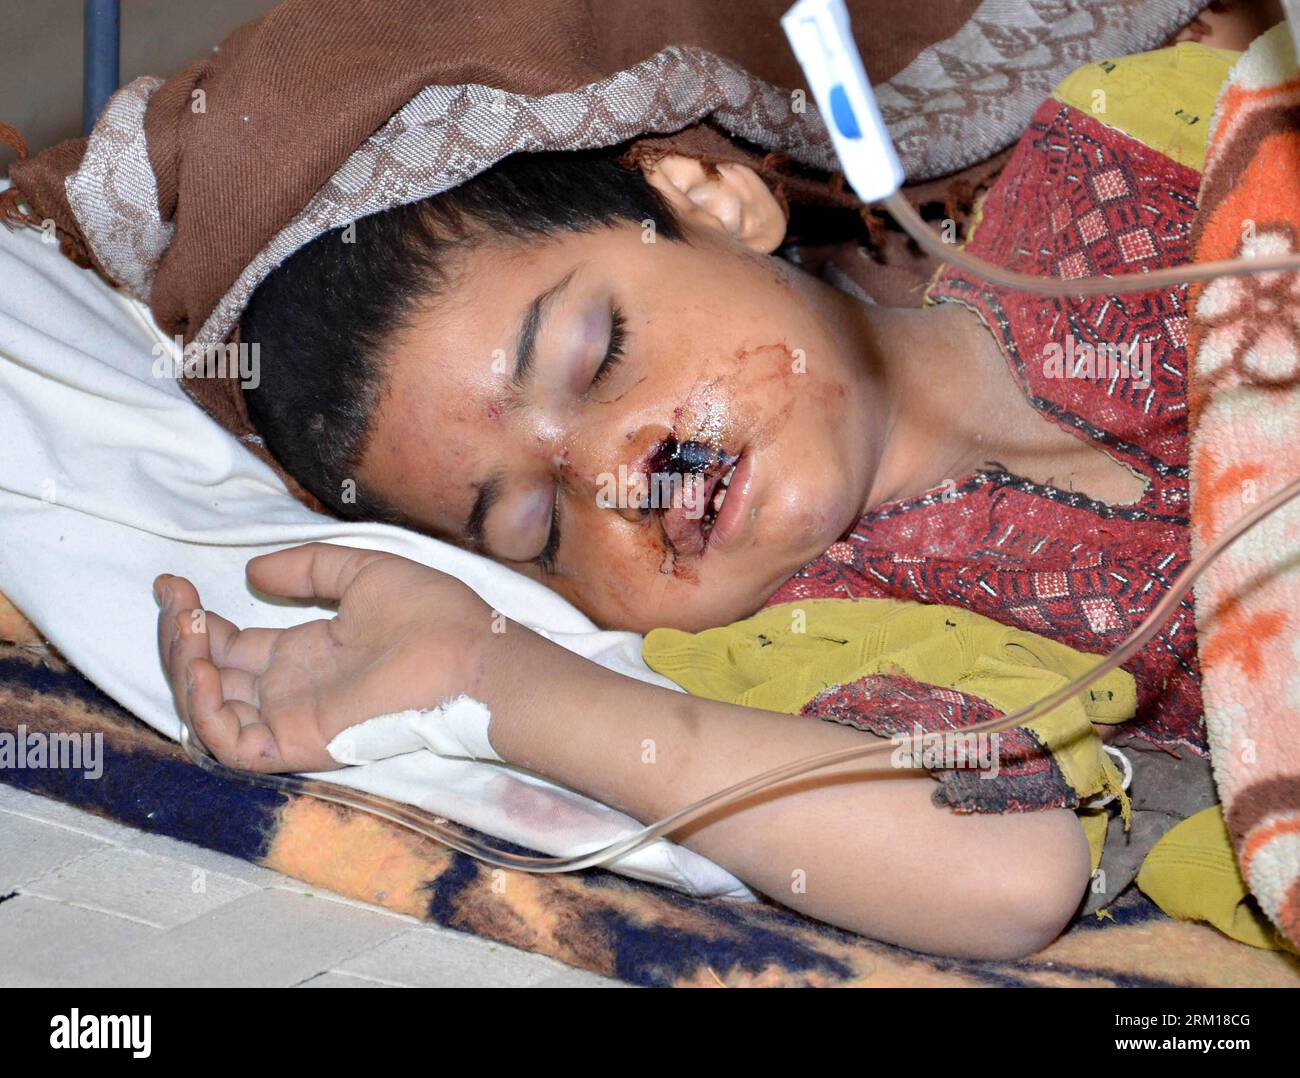 Bildnummer: 59536897  Datum: 17.04.2013  Copyright: imago/Xinhua (130418) -- MASHKEL, April 18, 2013 (Xinhua) -- An injured Pakistani kid is treated at a military field hospital in the quake-hit area of southwest Pakistan s Mashkel on April 17, 2013. The Pakistani authorities on Thursday said that rescue operations had been sped up in areas affected by the Tuesday s 7.9 magnitude earthquake in the country s southwestern province of Balochistan near Pak-Iran border. According to the official figures, at least 40 were killed and over 300 others injured when tremors jolted the Mashkel area of Was Stock Photo